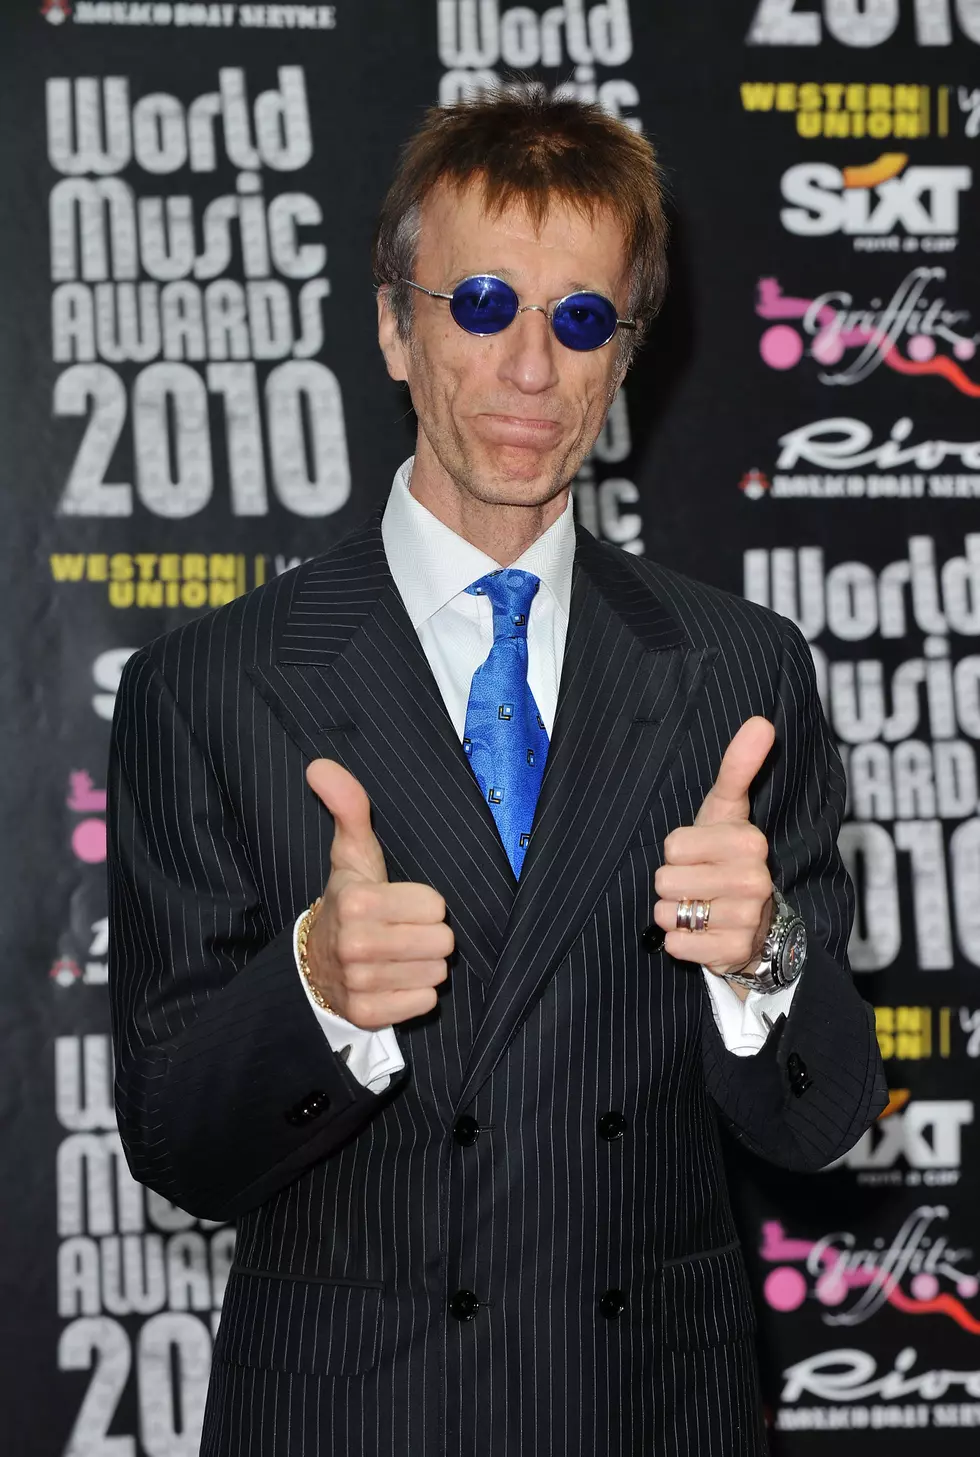 ROBIN GIBB CONTINUES TO RECOVER FROM LIVER CANCER